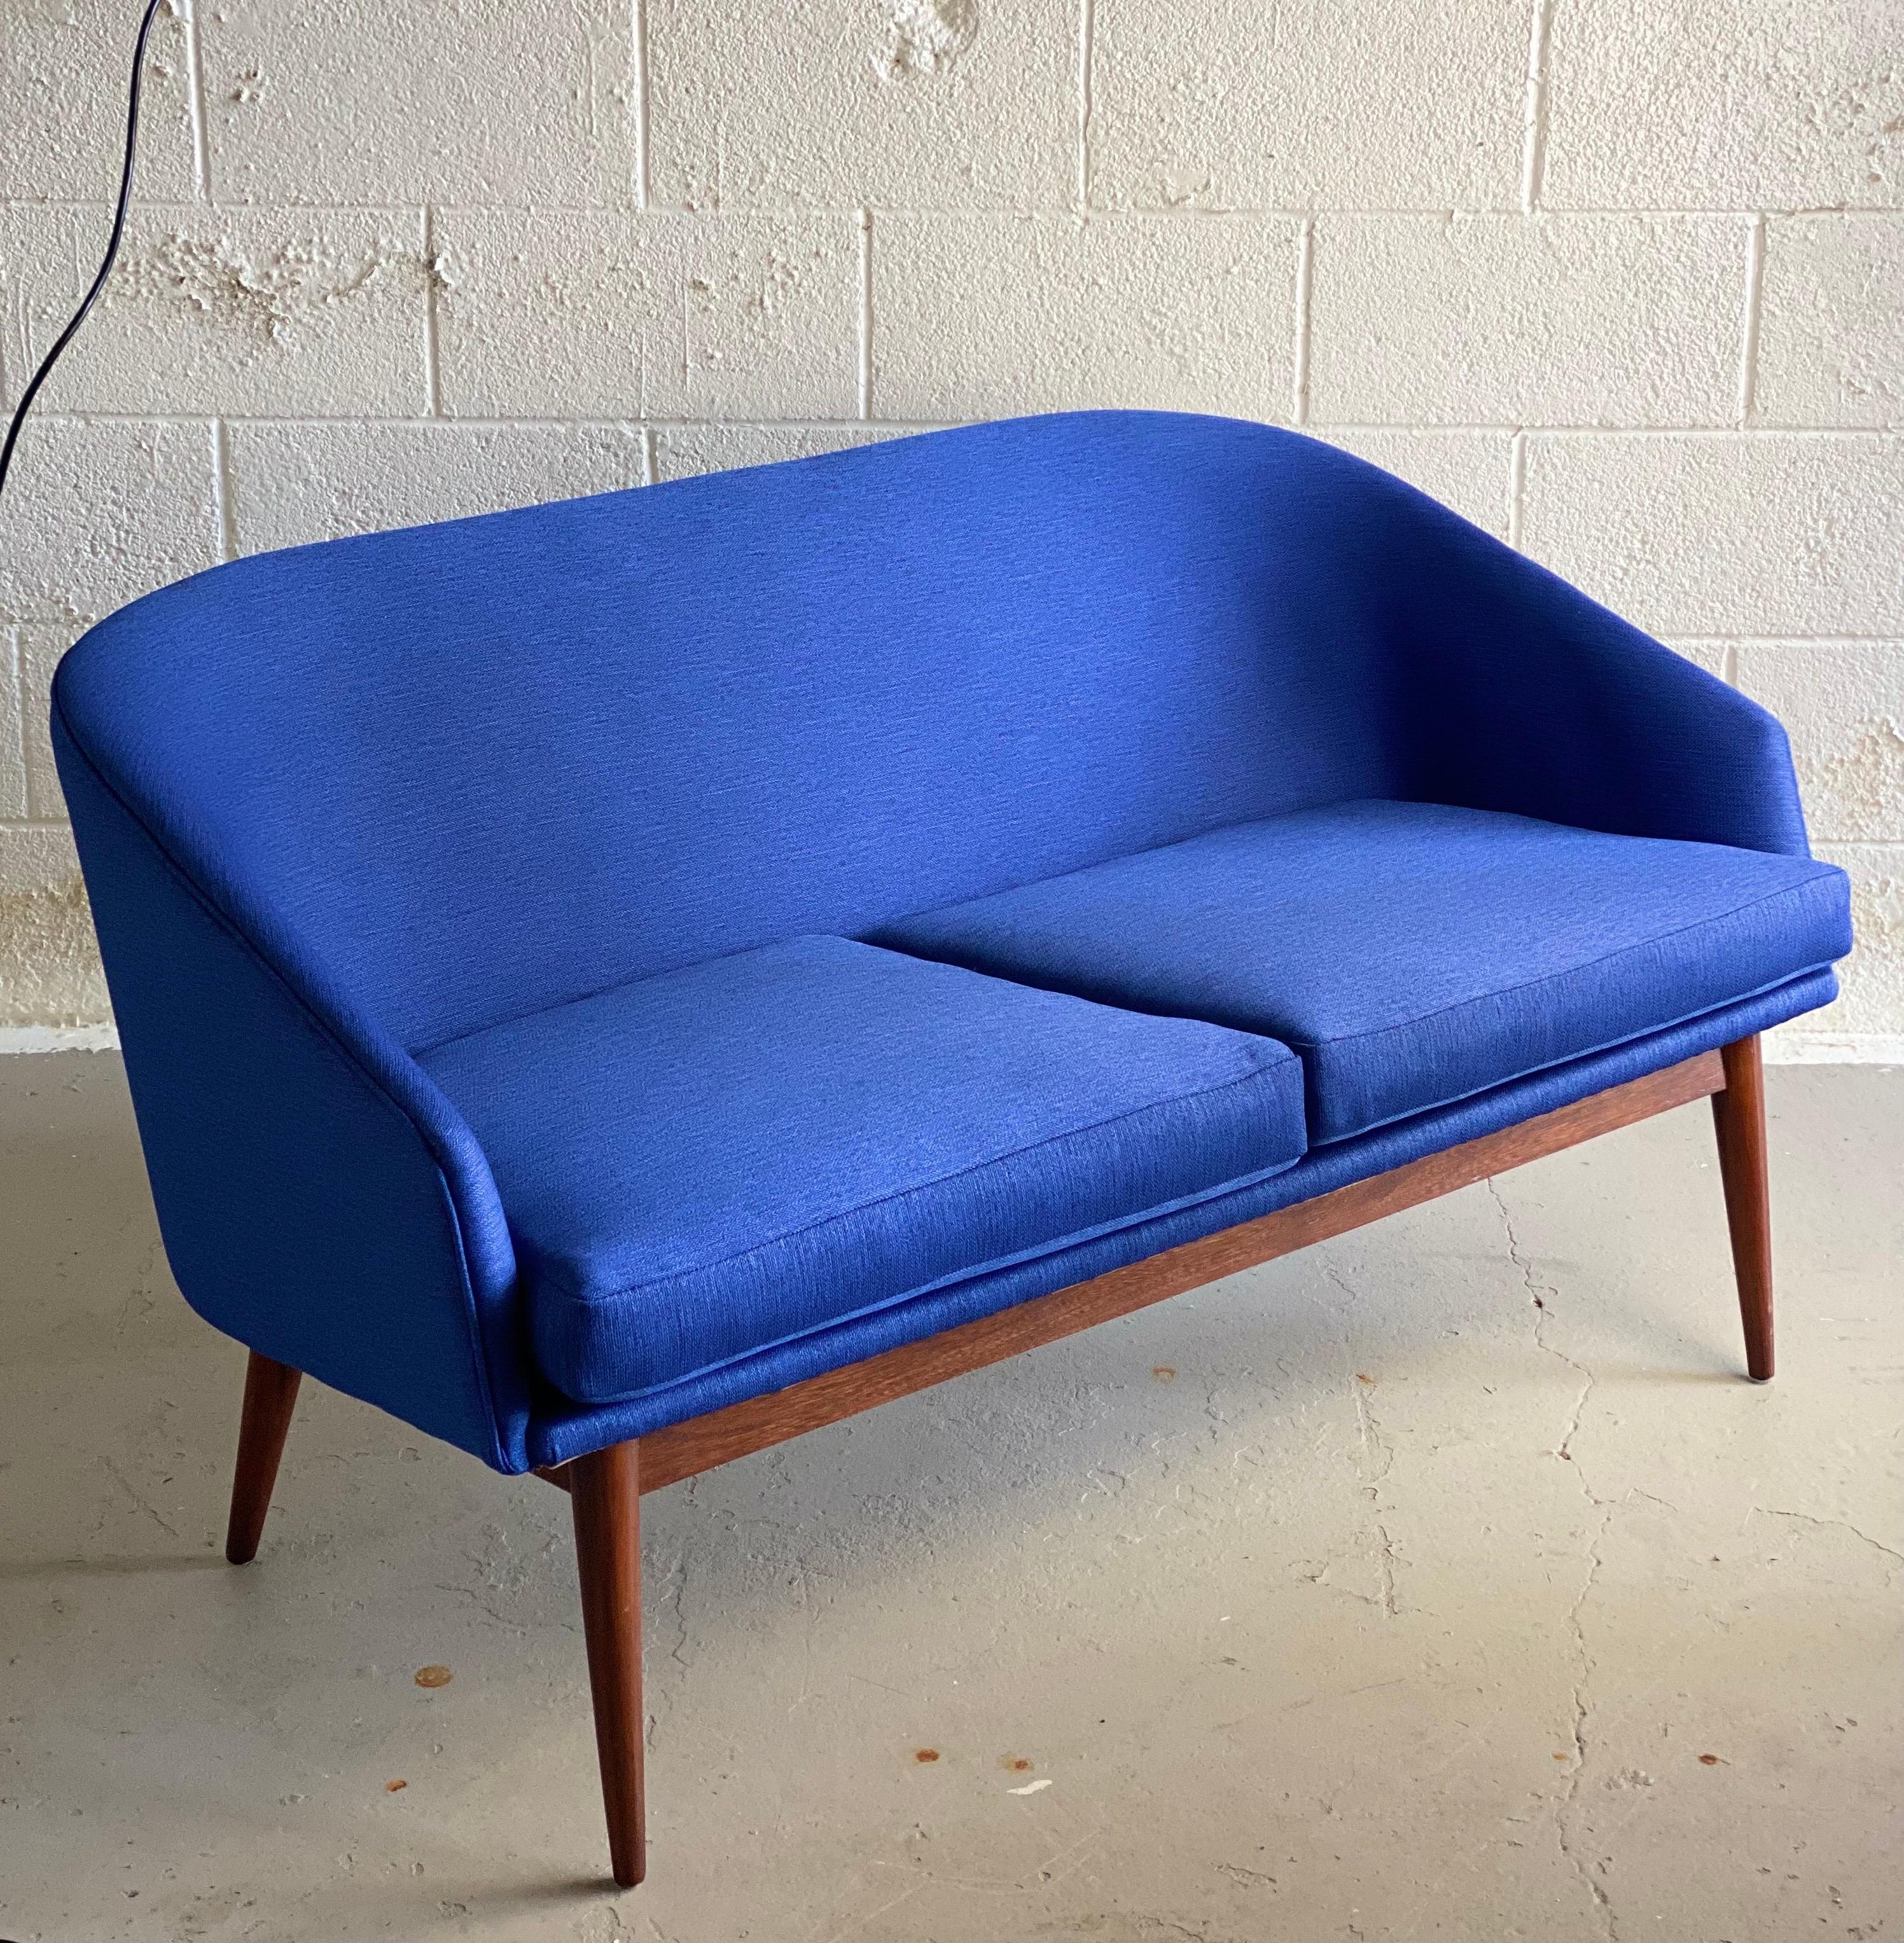 We are very pleased to offer a stunning, Danish modern sofa in the style of Arne Vodder, circa the 1950s. This beautiful piece has been meticulously restored by our expert craftsmen, keeping its original standards of aesthetics and composition to